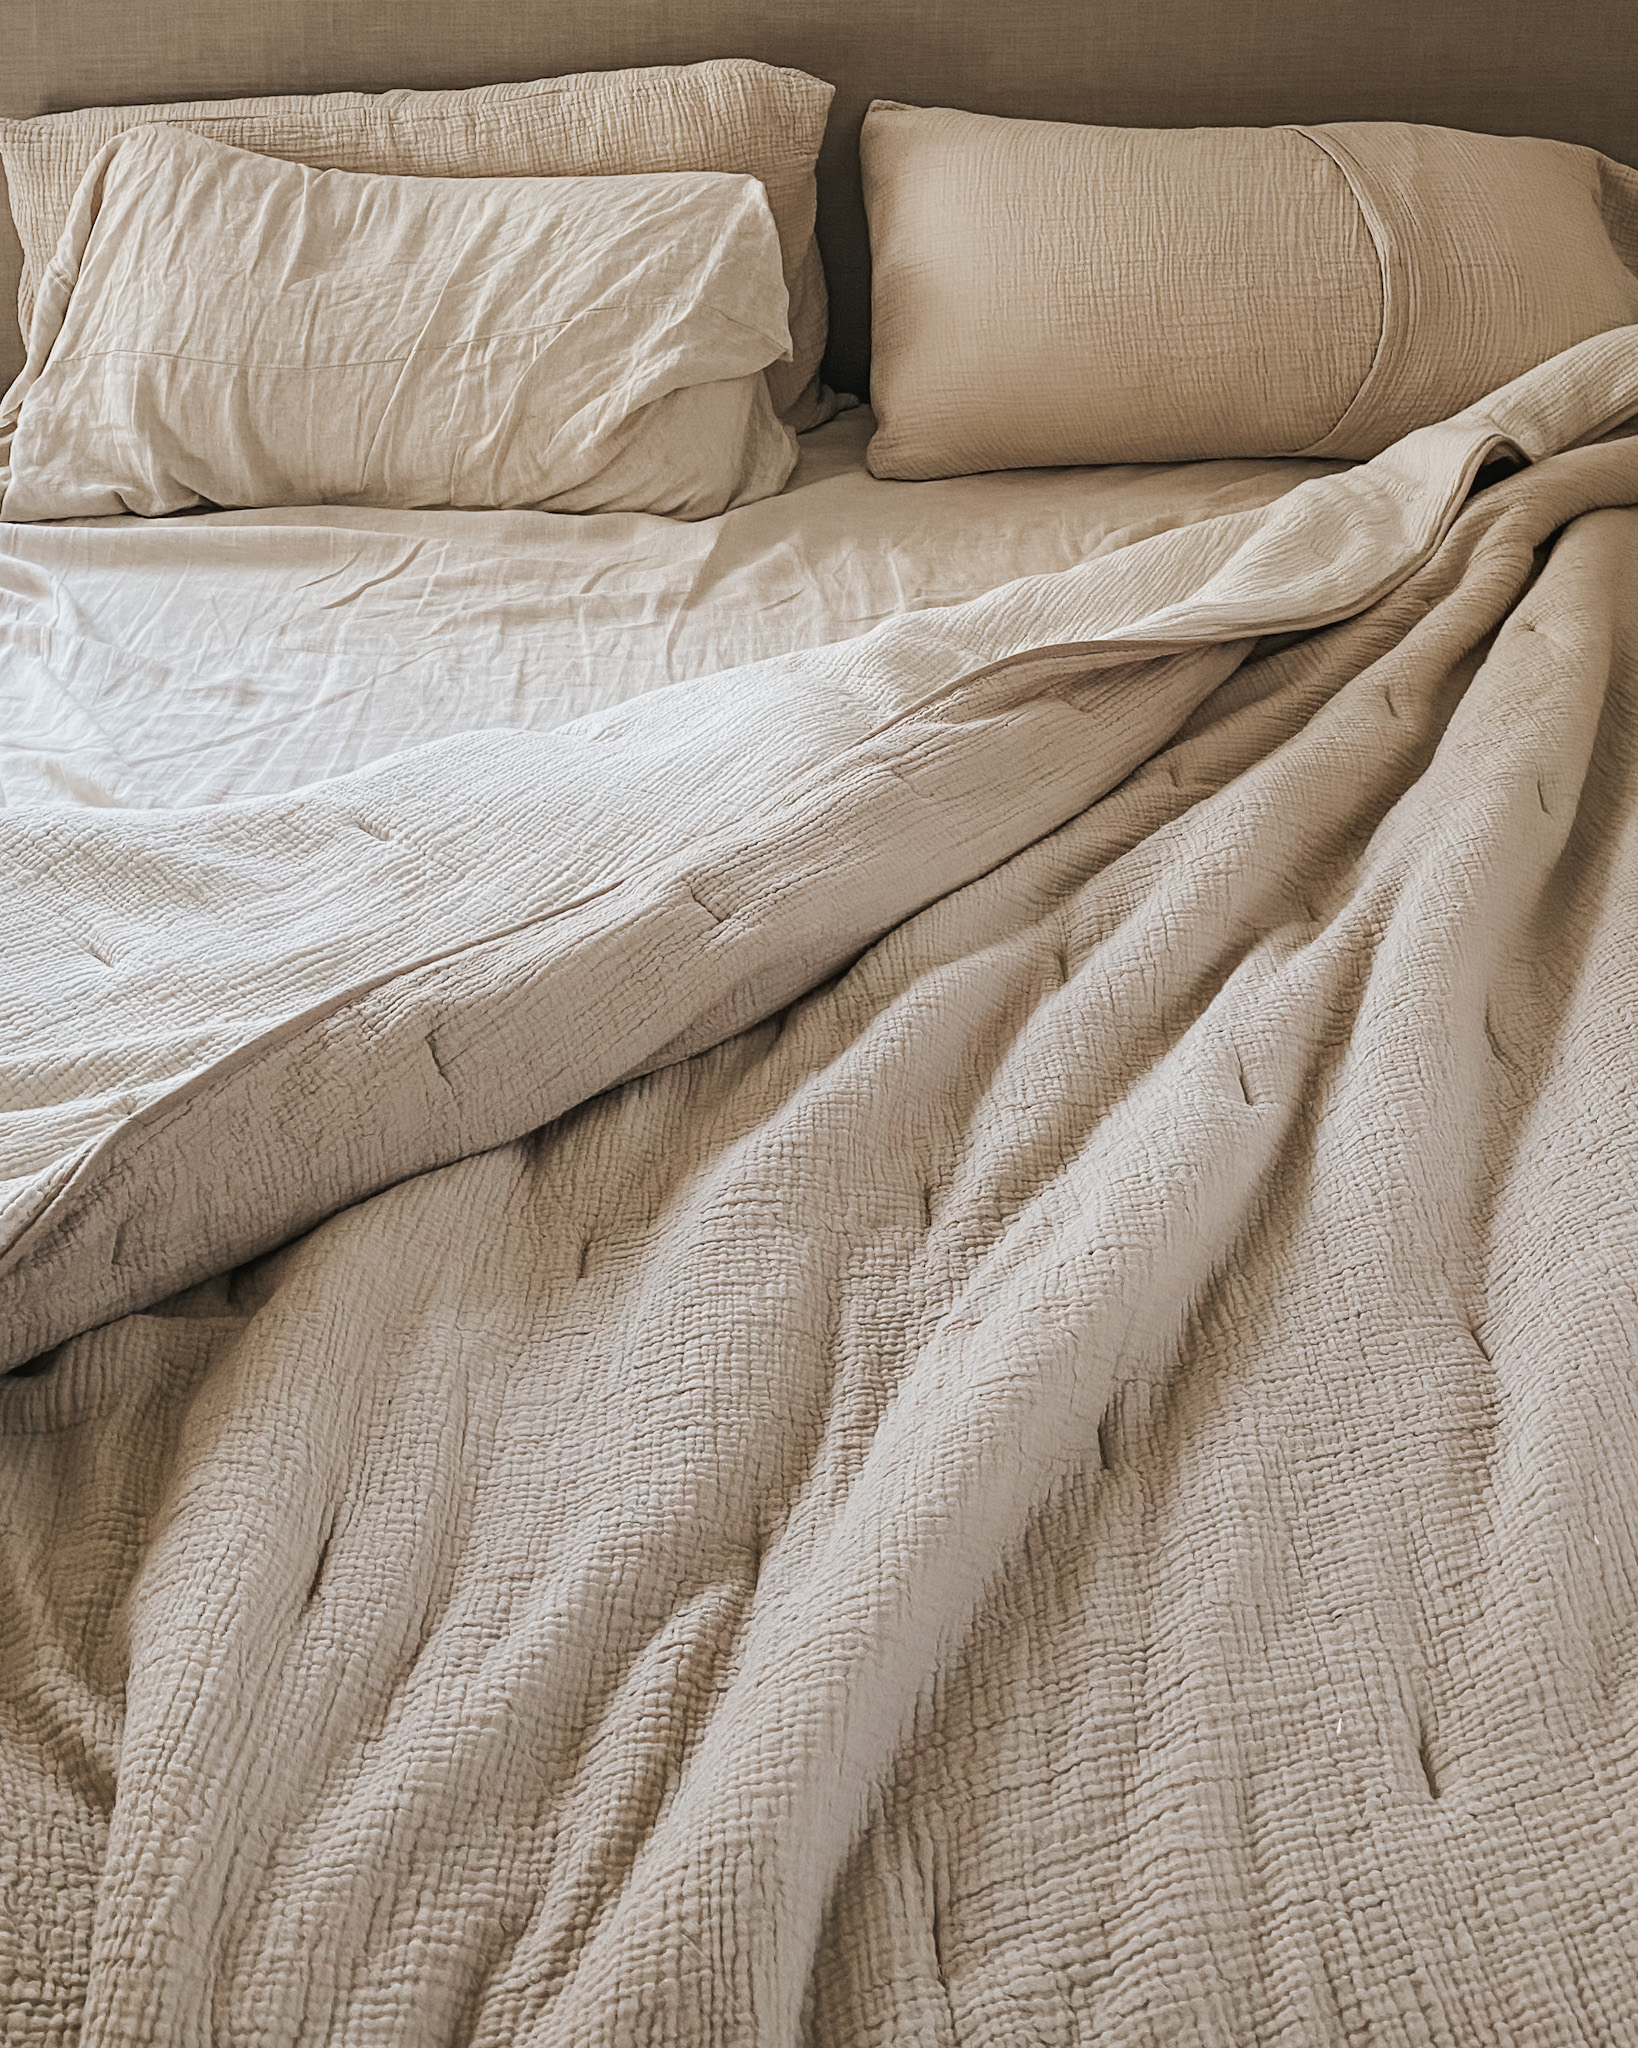 Clean Your Mattress Naturally